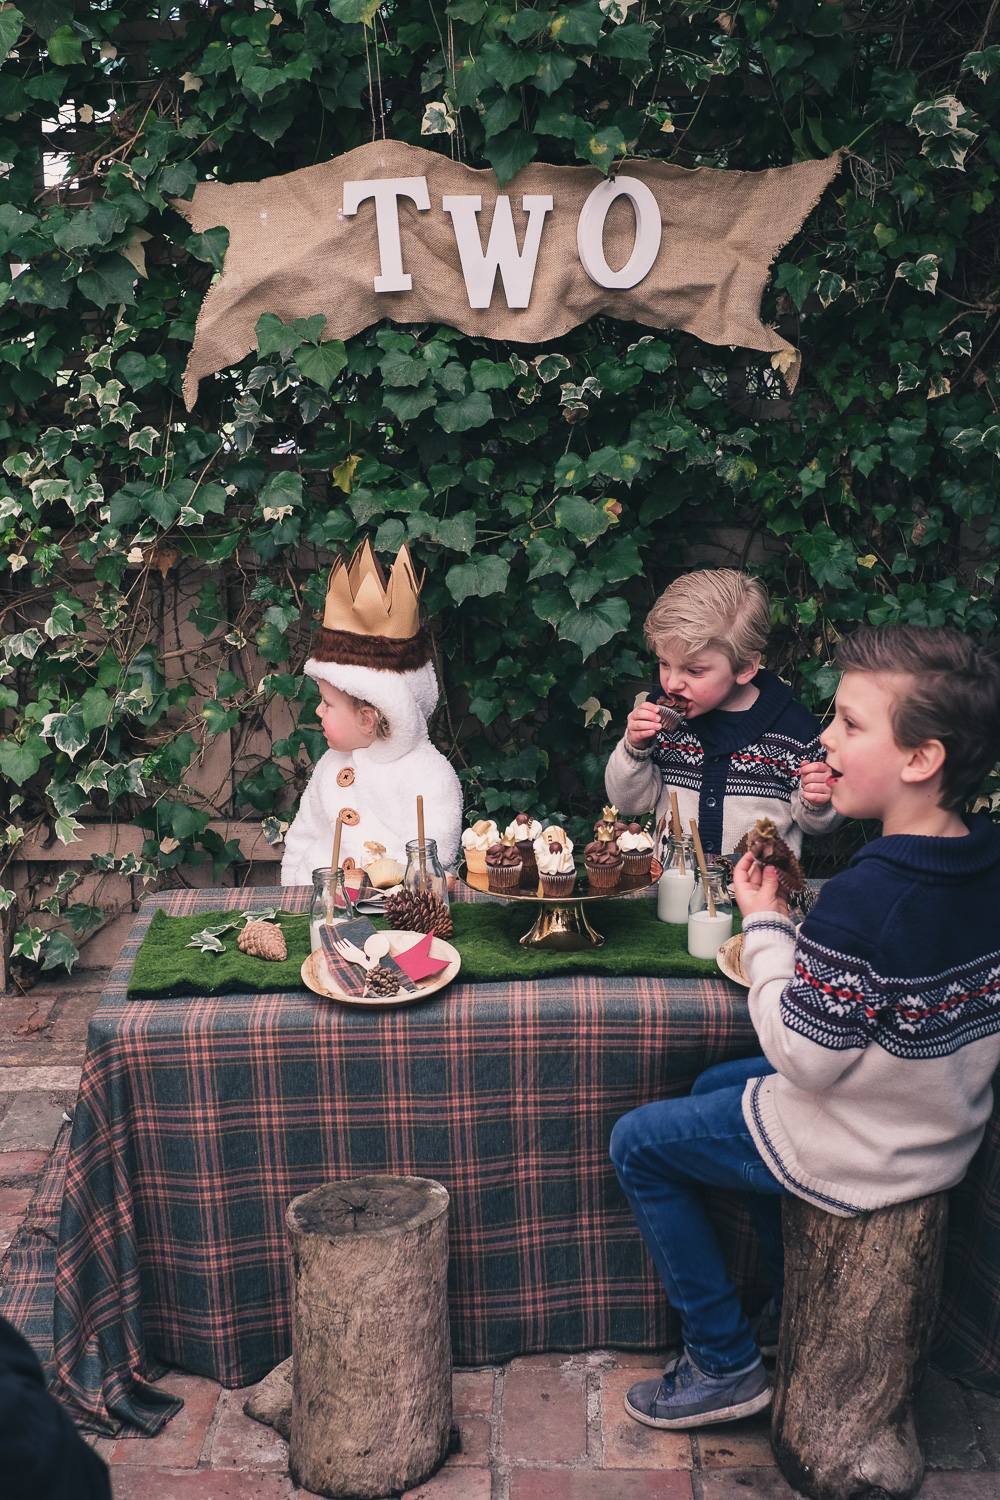 Children seated at Where The Wild Things Are party table eating cake